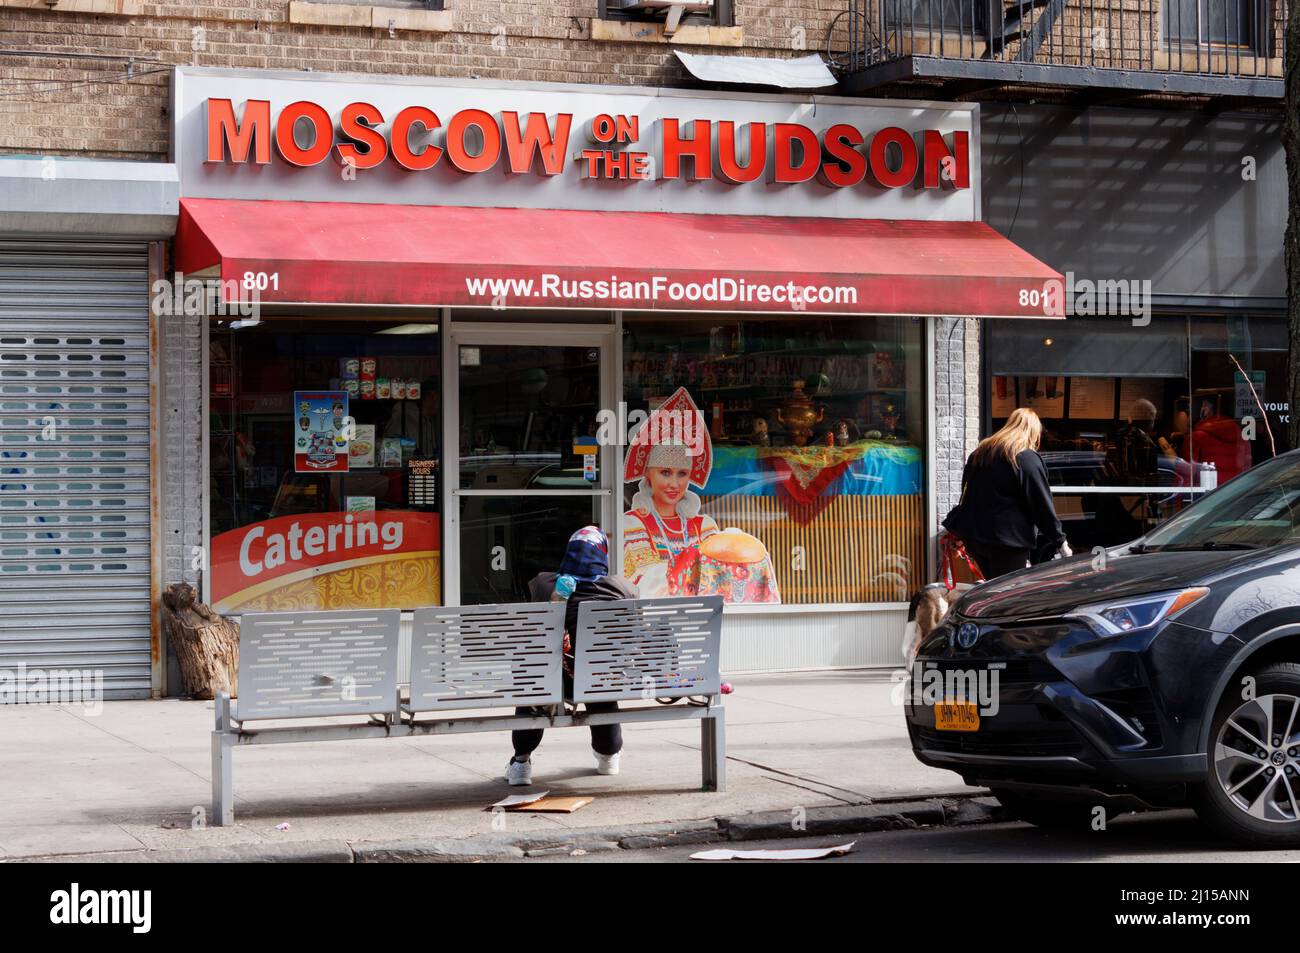 Moscow on the Hudson, a Russian food store located on 181st st. in the Wasington Heights section of Northern Manhattan, New York City Stock Photo